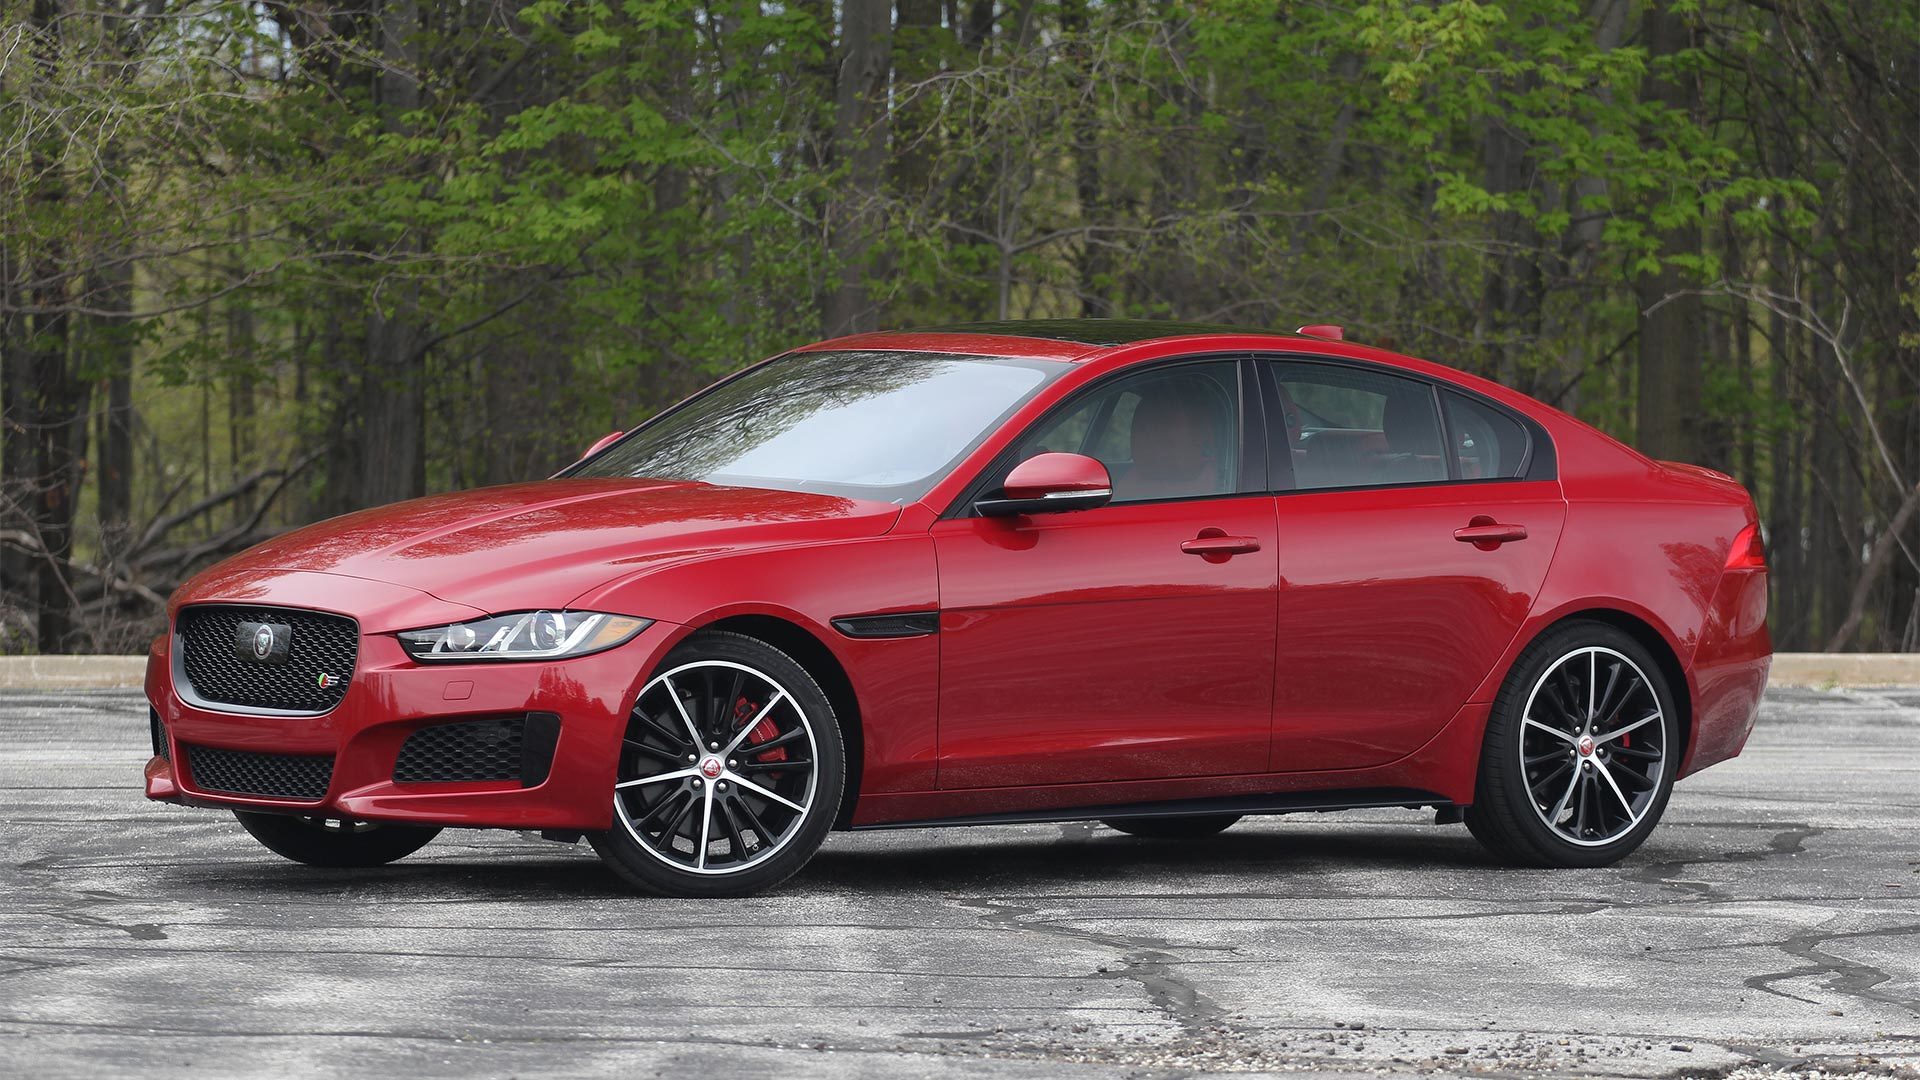 2018 Jaguar XE S AWD: 10 Things You Need To Know